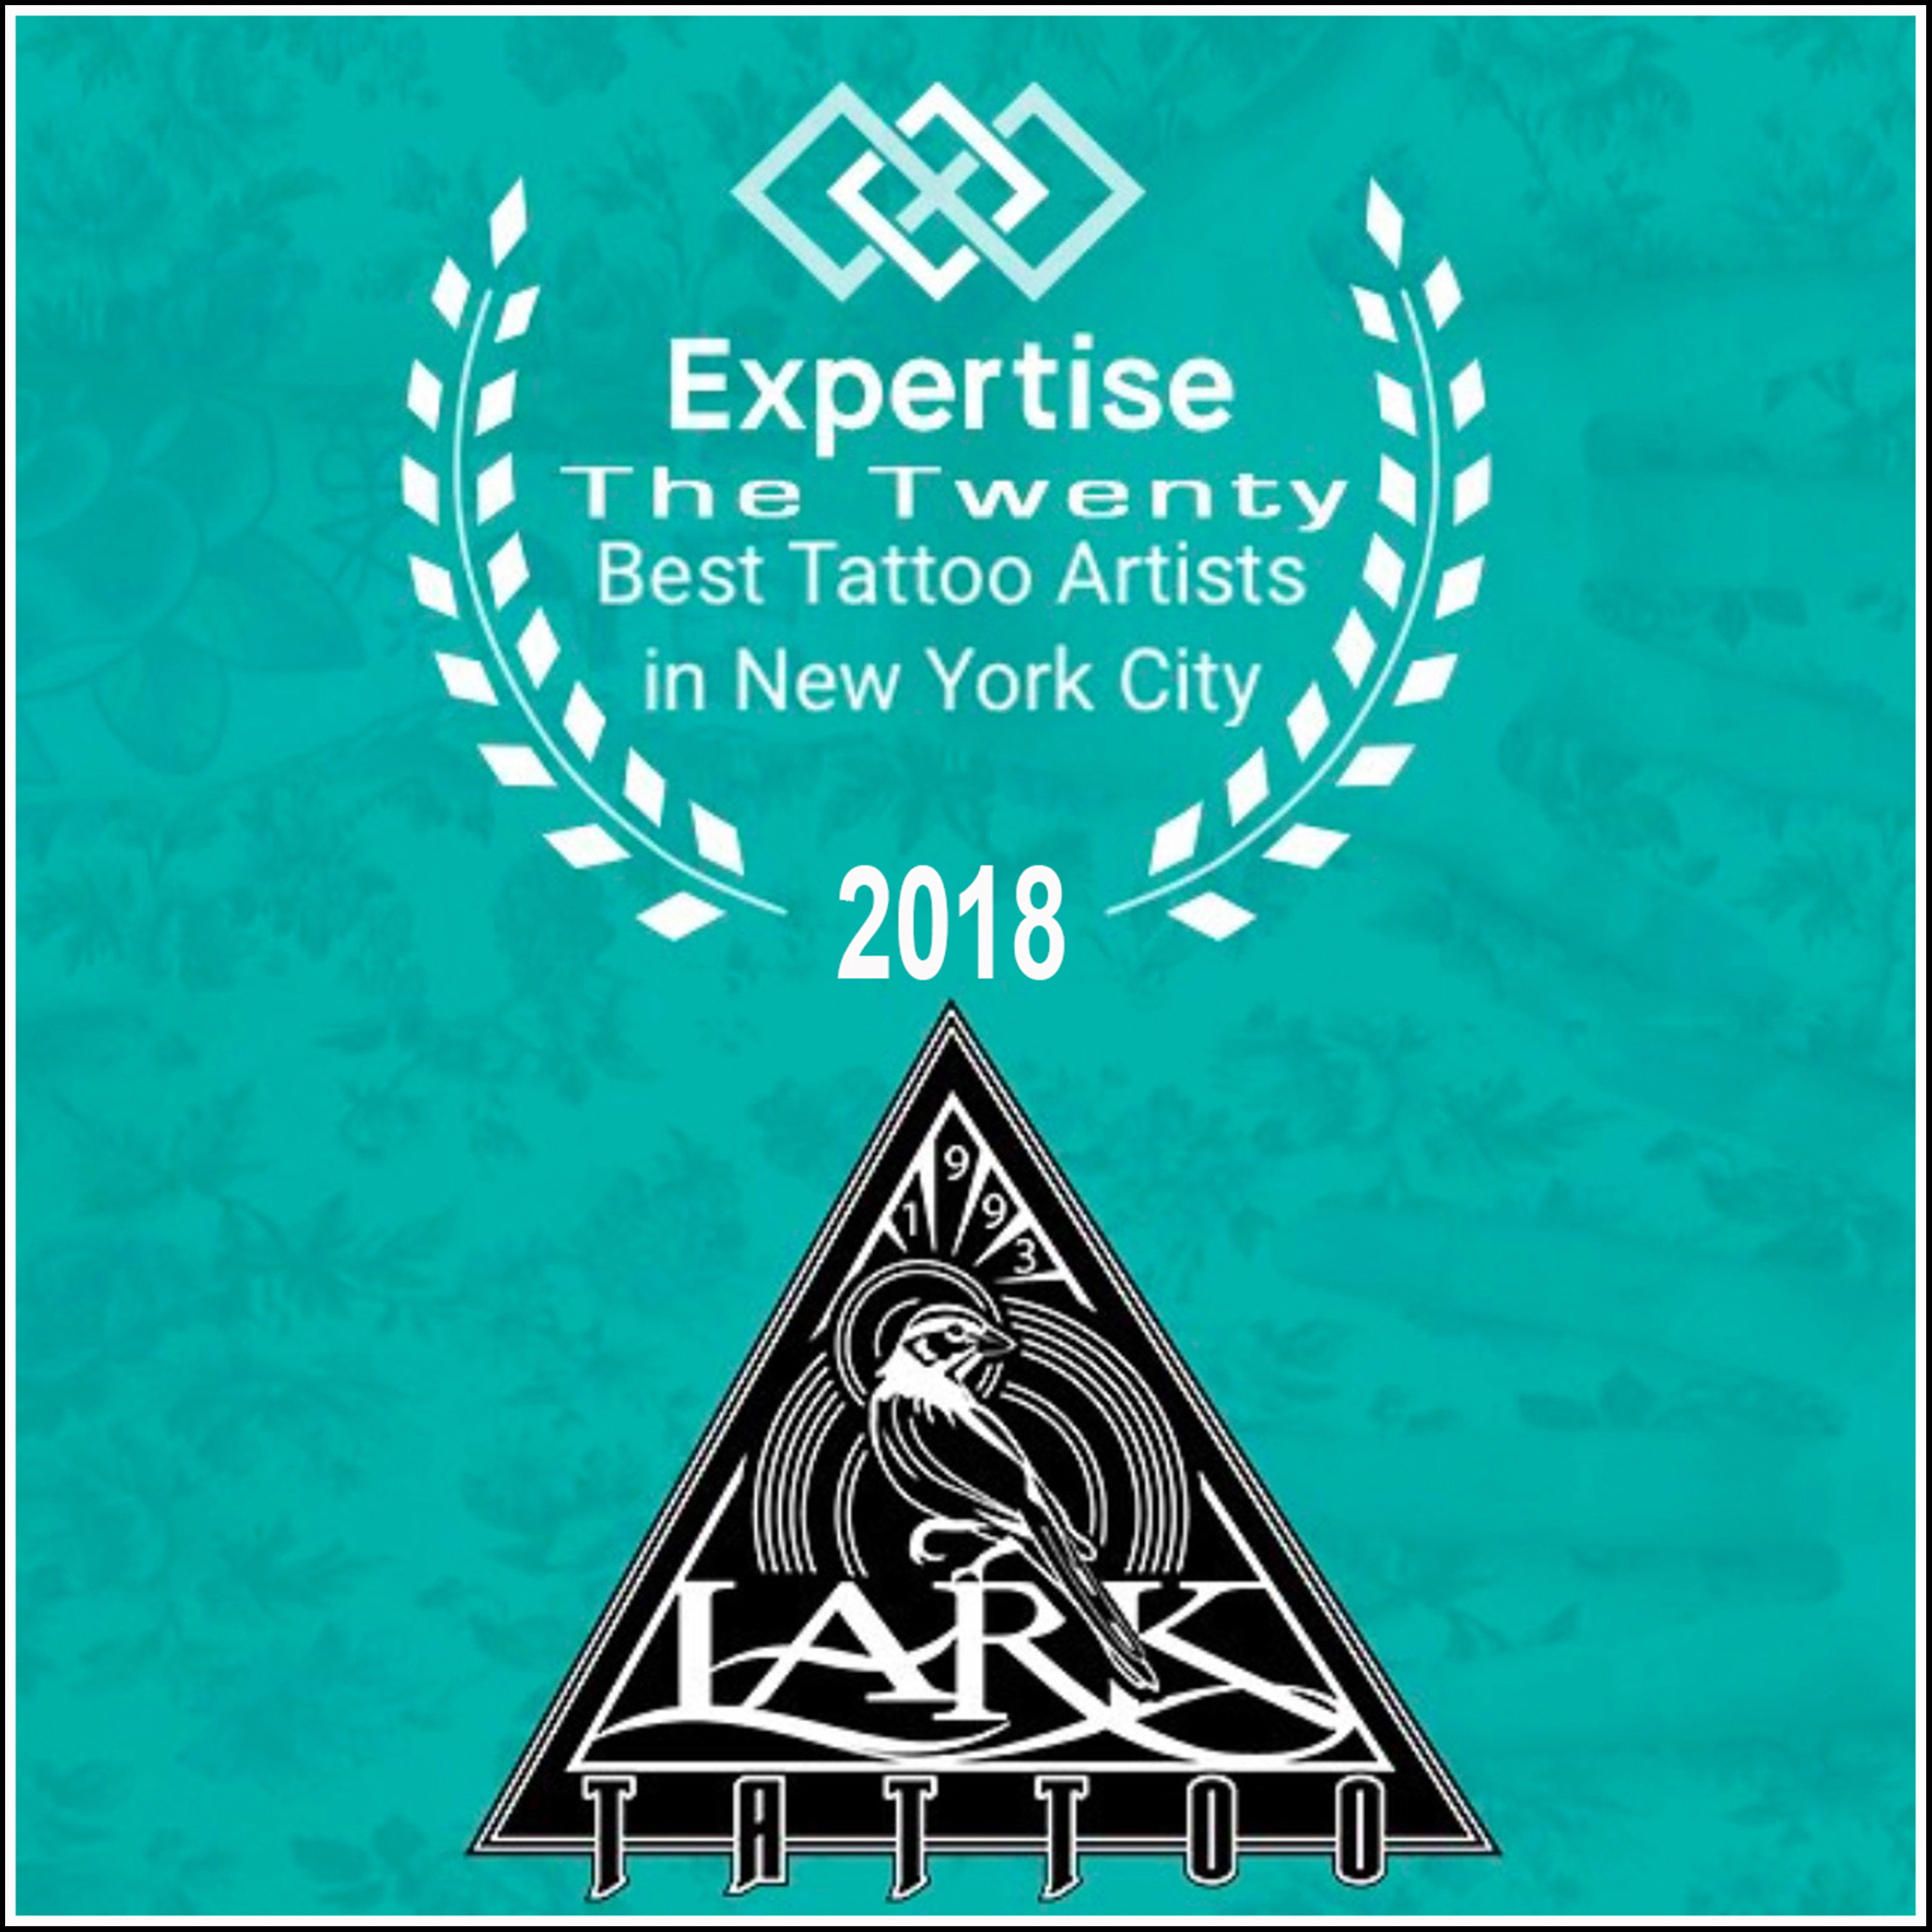  has named Lark Tattoo as part of The Twenty Best Tattoo Shops  of New York City for 2018 - -